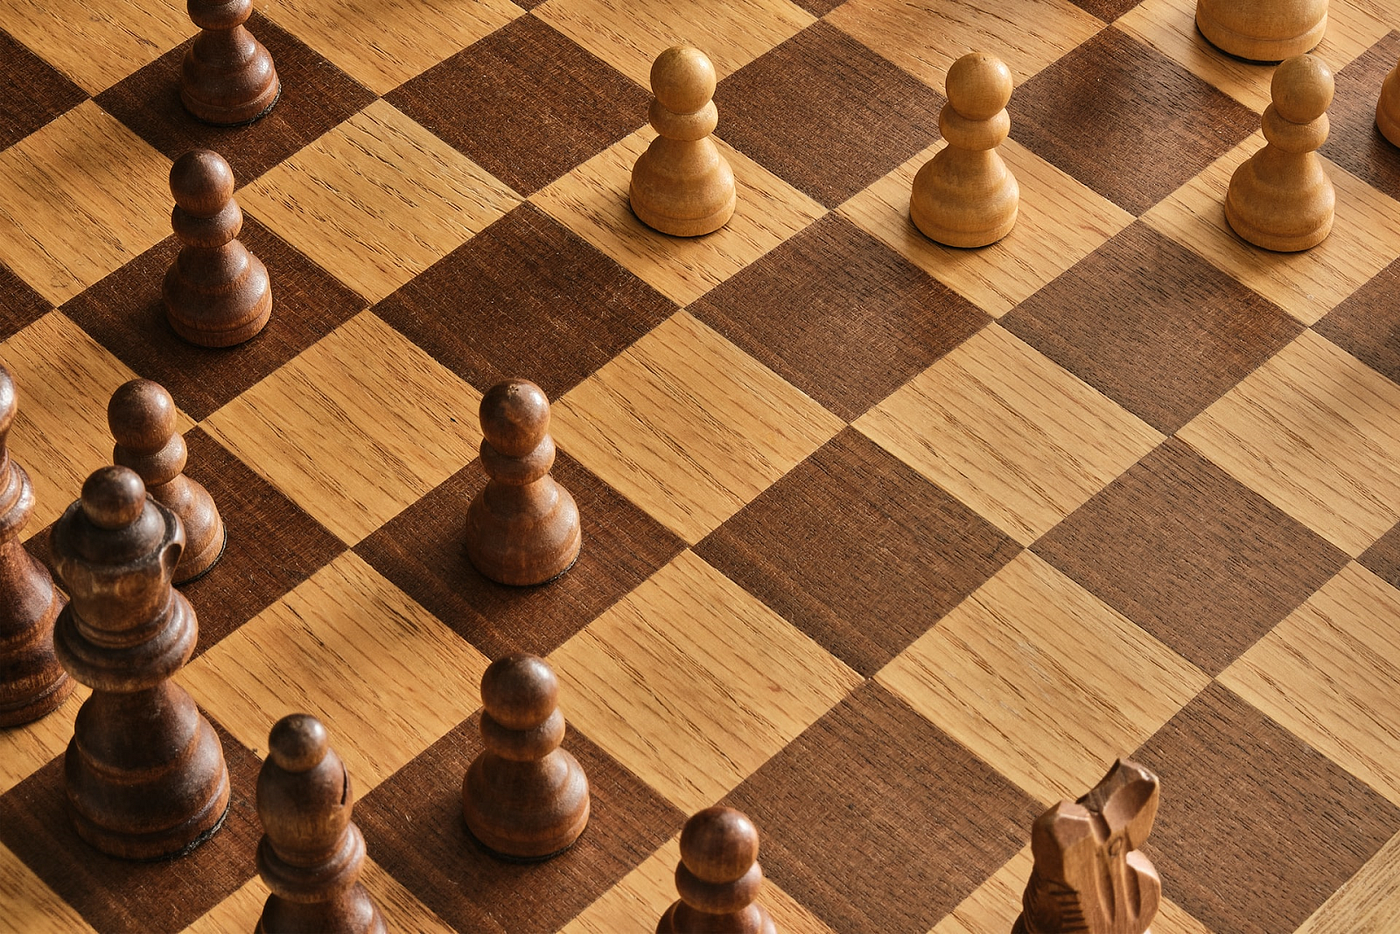 Beyond Chess and the Art of Enterprise Architecture - Architecture &  Governance Magazine